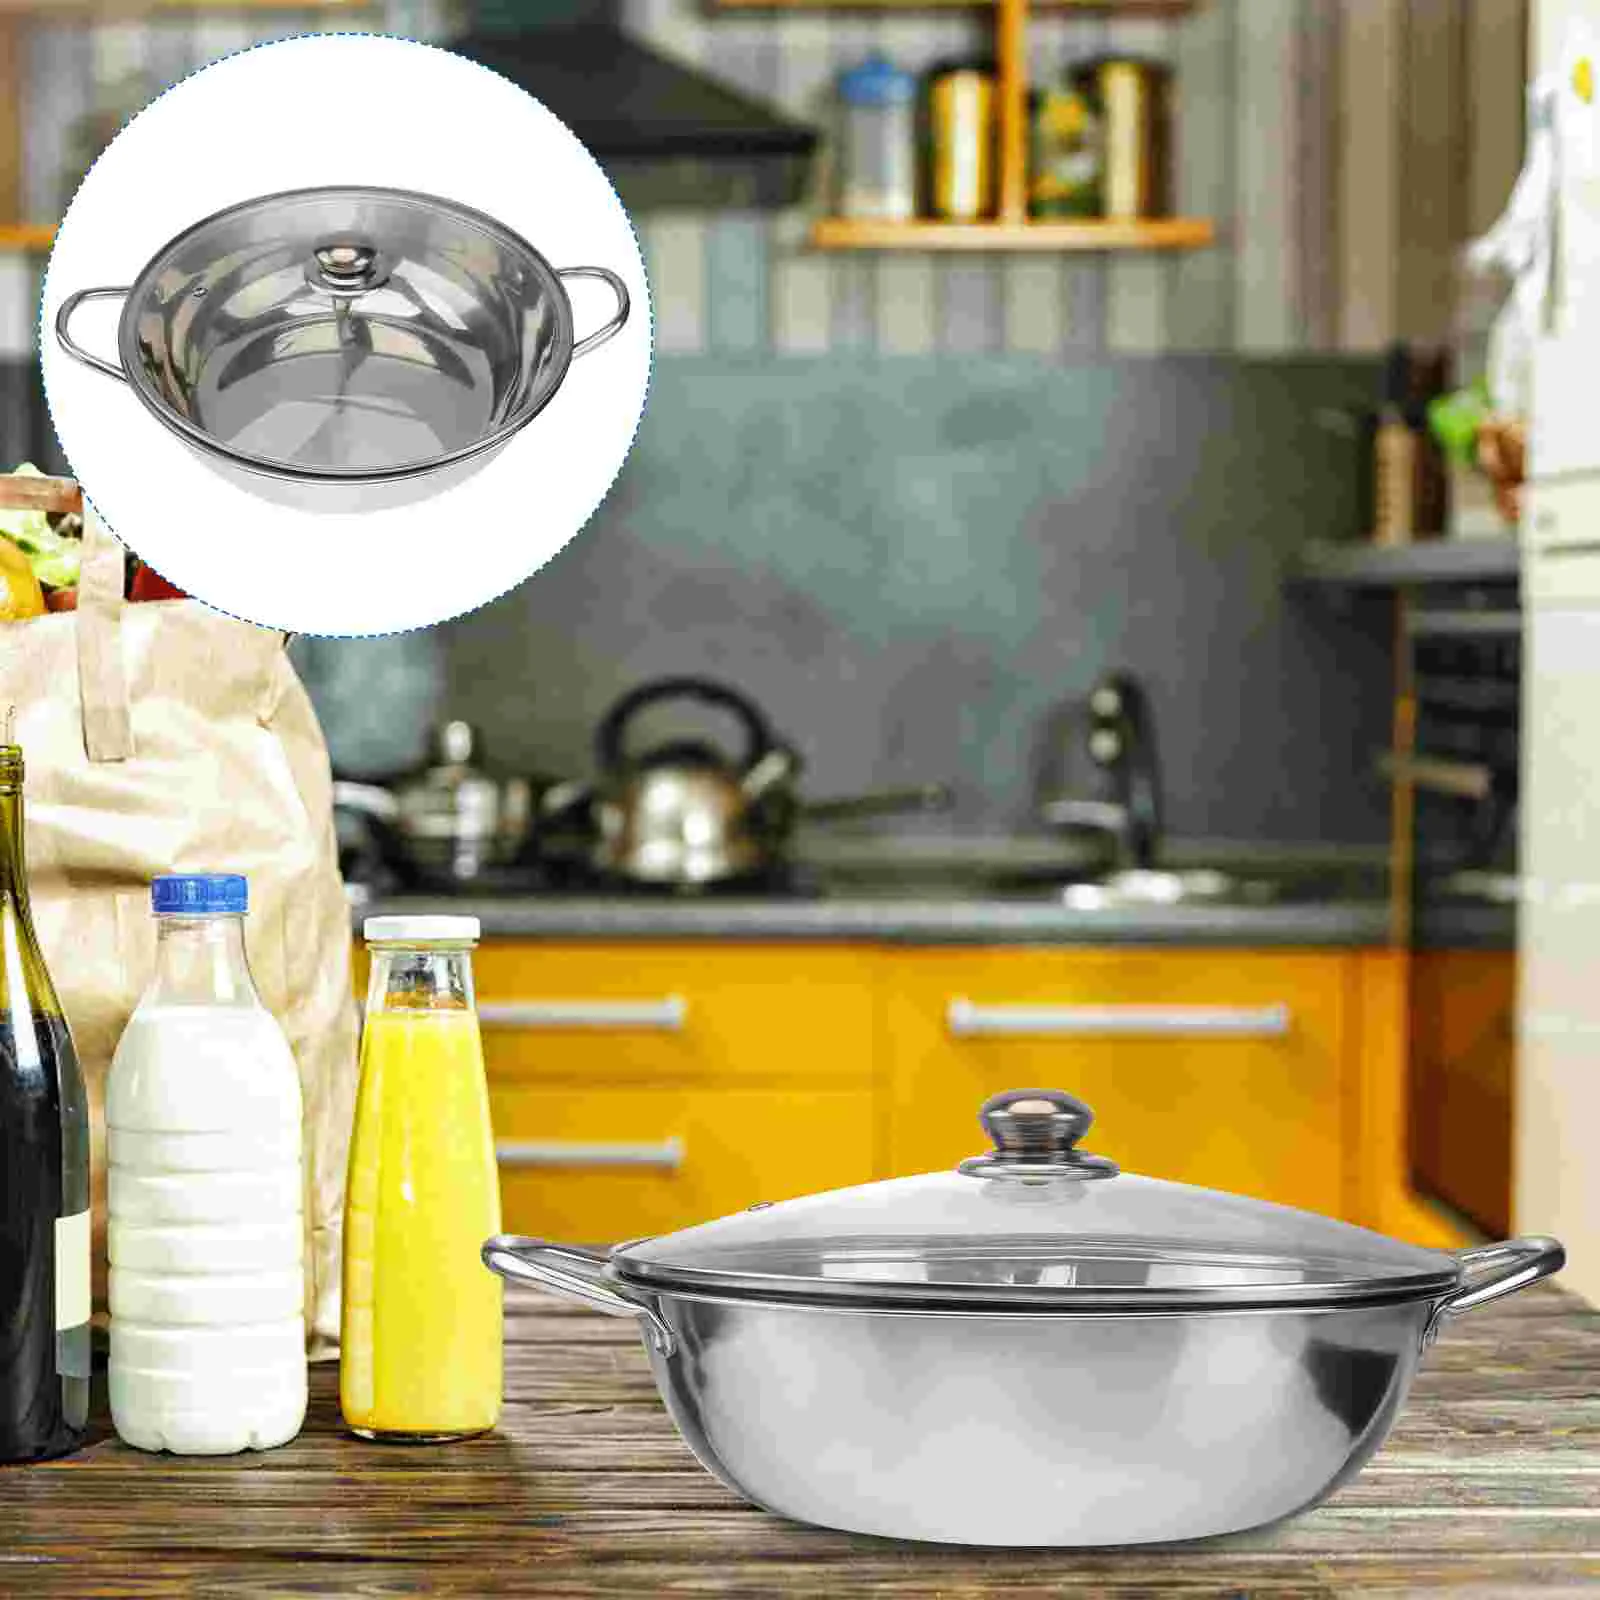 https://ae01.alicdn.com/kf/Sf4adcdfa85f04073a57a69b047ed181cZ/Stainless-Steel-Shabu-Hot-Pot-With-Divider-For-Electric-Induction-Cooktop-Gas-Stove-Dual-Sided-Soup.jpg